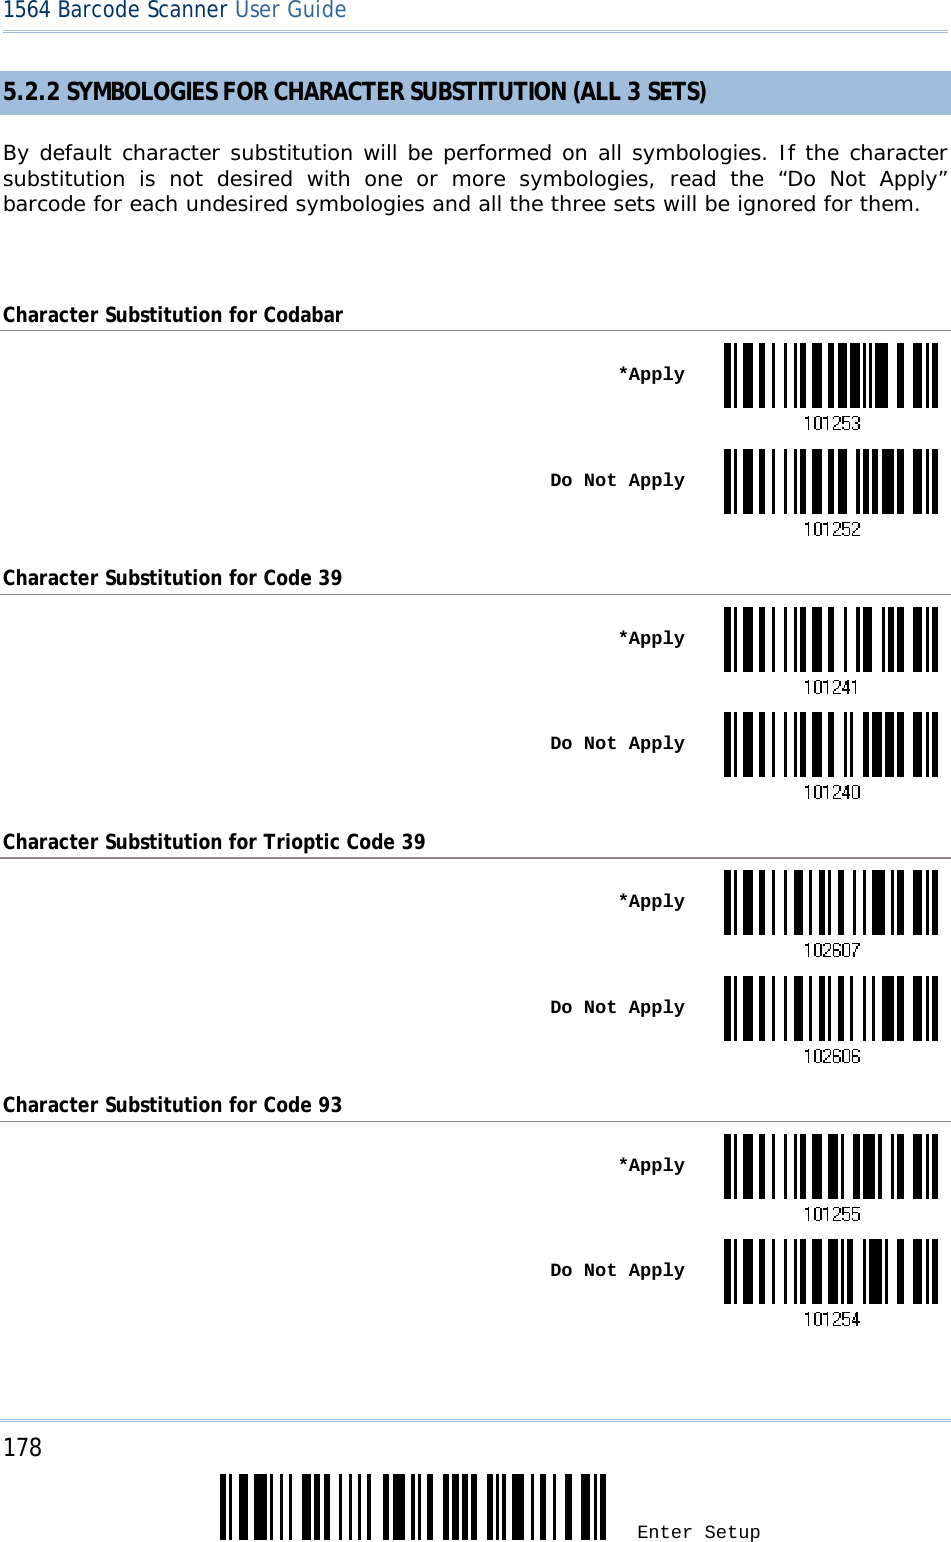 178 Enter Setup 1564 Barcode Scanner User Guide  5.2.2 SYMBOLOGIES FOR CHARACTER SUBSTITUTION (ALL 3 SETS) By default character substitution will be performed on all symbologies. If the character substitution is not desired with one or more symbologies, read the “Do Not Apply” barcode for each undesired symbologies and all the three sets will be ignored for them.  Character Substitution for Codabar  *Apply Do Not ApplyCharacter Substitution for Code 39  *Apply Do Not ApplyCharacter Substitution for Trioptic Code 39  *Apply Do Not ApplyCharacter Substitution for Code 93  *Apply Do Not Apply  